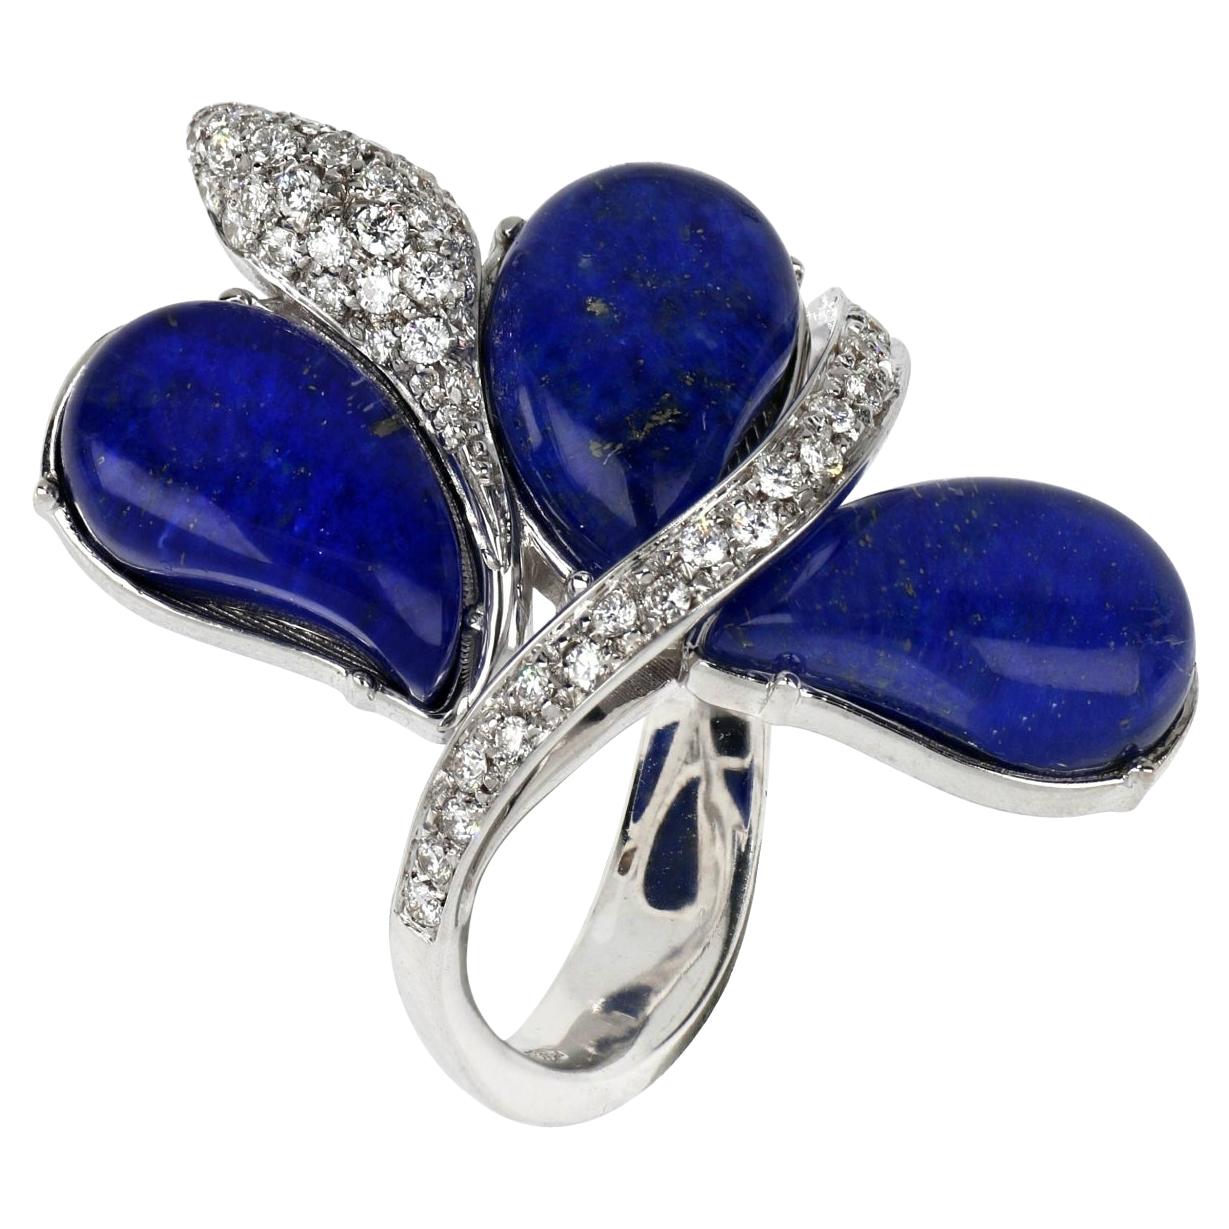 For Sale:  18kt White Gold Les Fleurs Ring with Blue Lapis Lazuli Drops and Diamonds